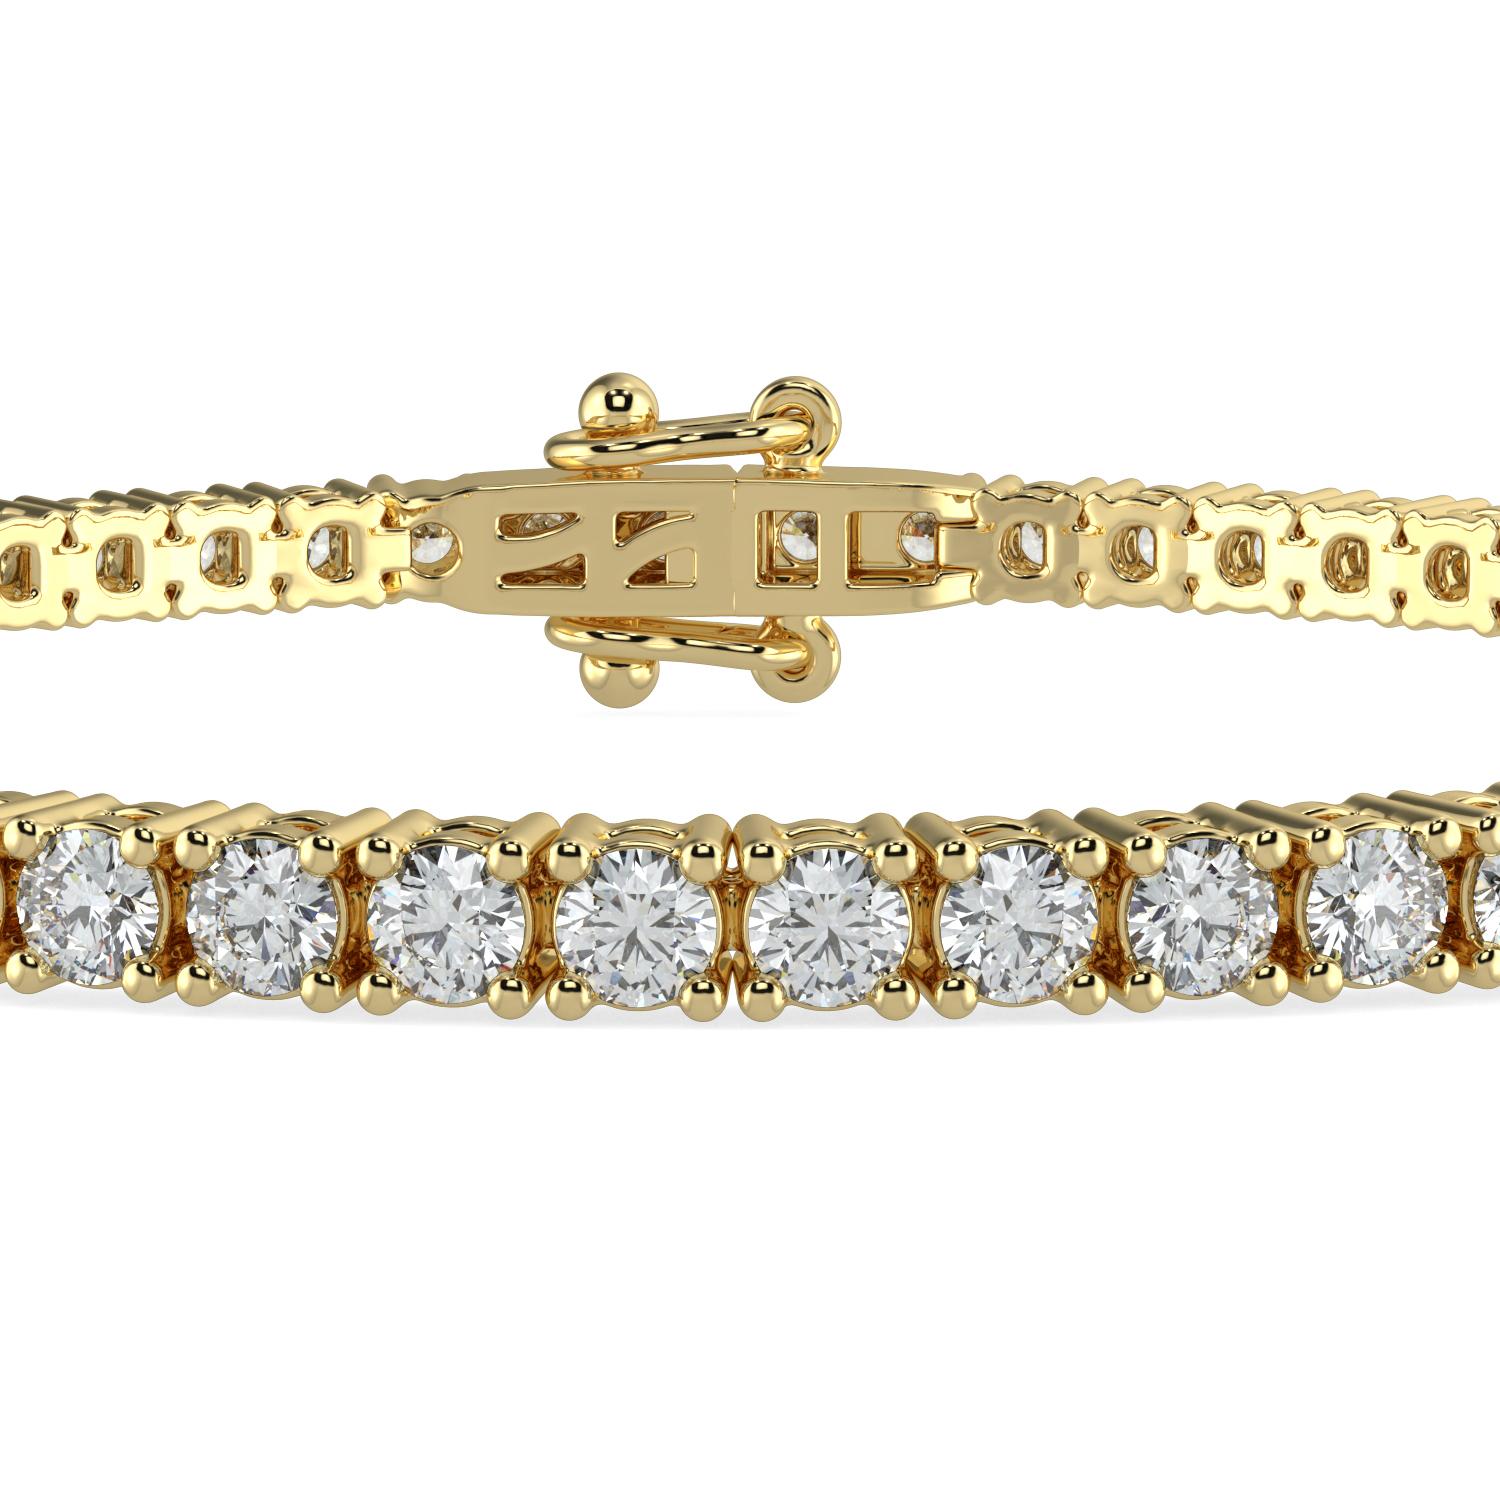 8.00 Carat Round Cut GH-I1 Natural Diamond Classic Tennis Bracelet 4 Prong 14K Yellow Gold for Women

Specification
Brand: AAMIAA
Length: 7 Inches 
Color: GH
Carat Weight:8CTW
Clarity: I1

LUXURIOUS AND LASTING- Our bracelets are a luxurious and